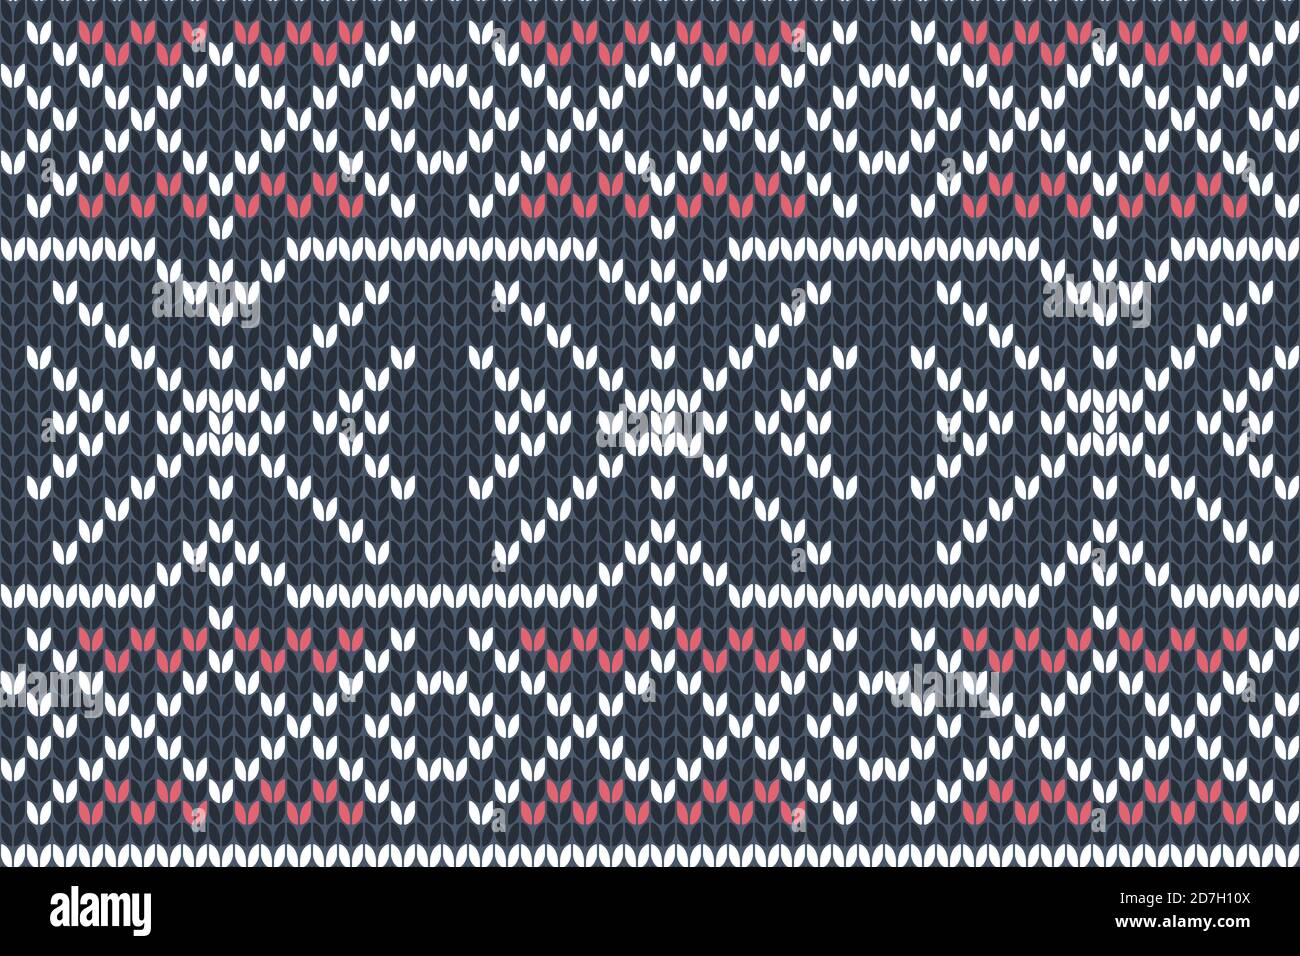 Vector seamless Knitting Pattern. Christmas, Winter holiday Sweater Design. Stock Vector